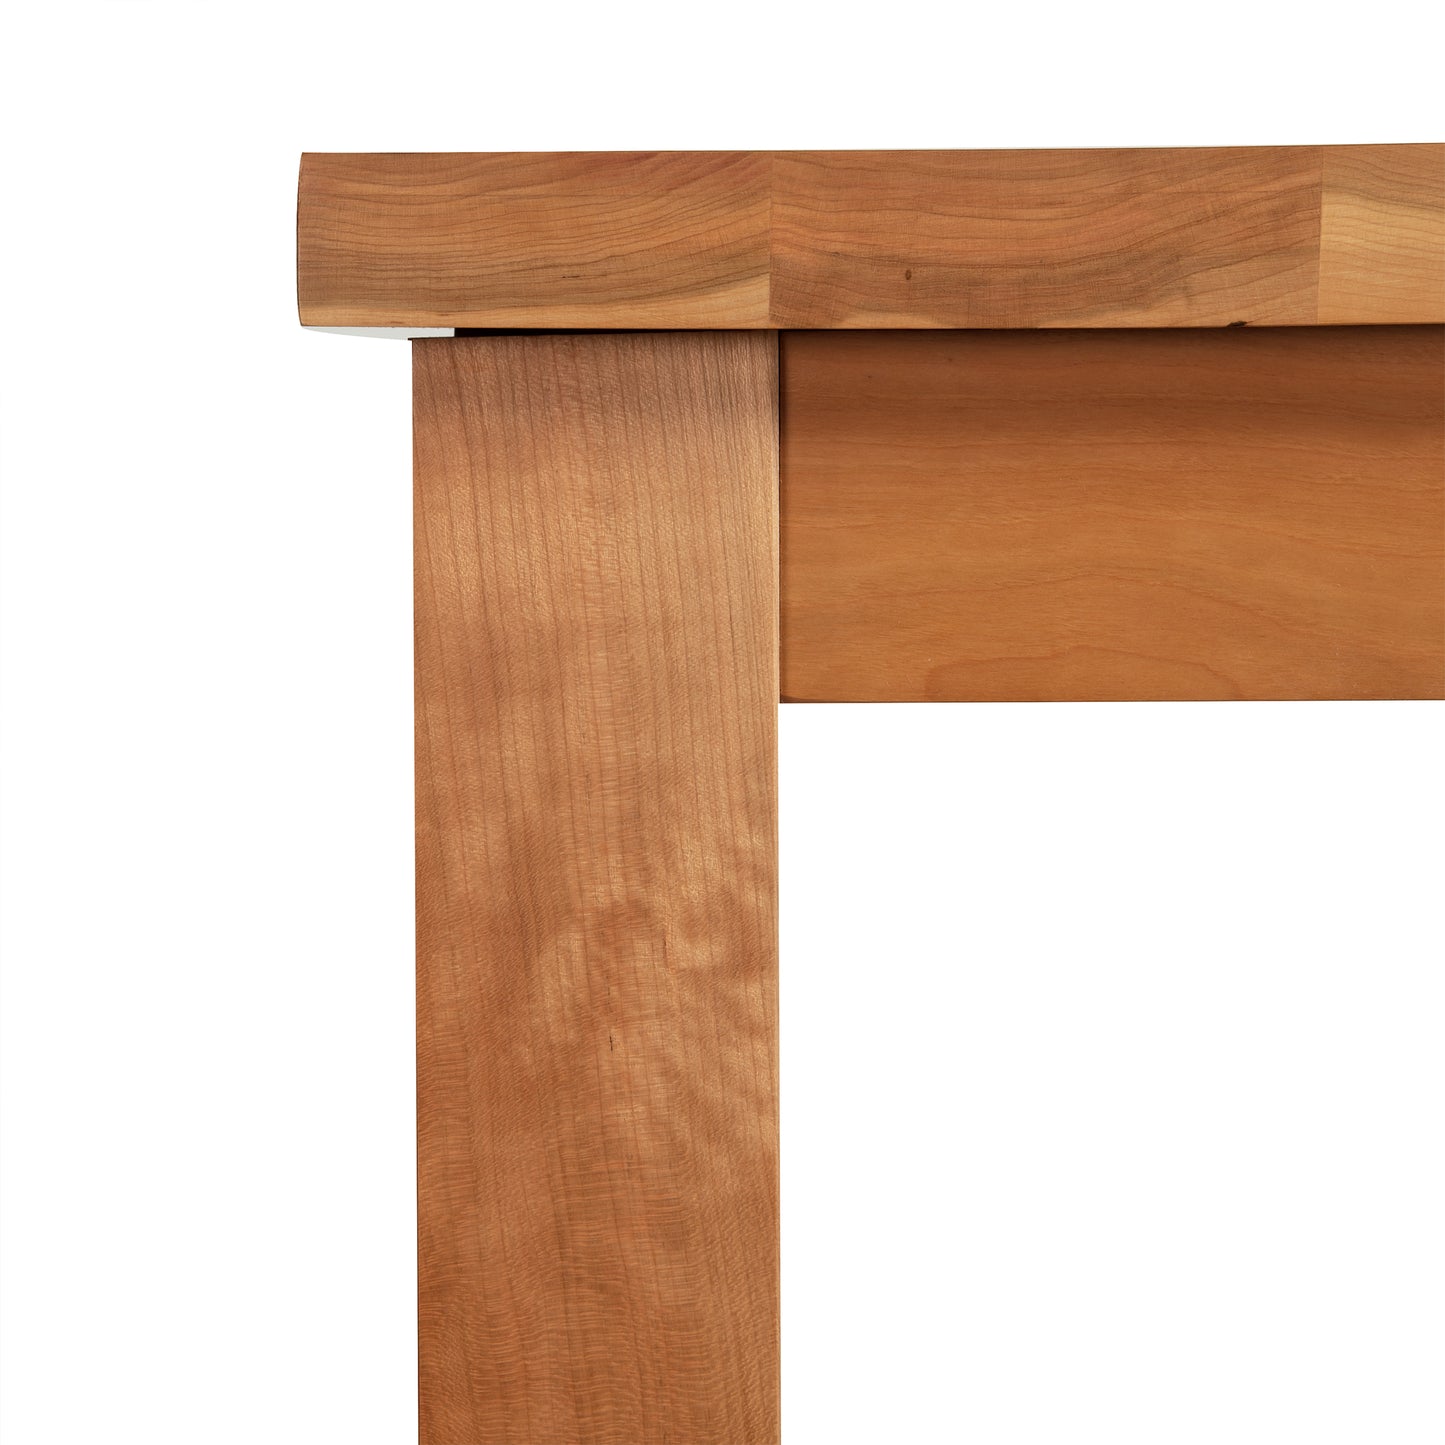 A close up of the Lyndon Furniture Modern Mission Parsons Extension Table.